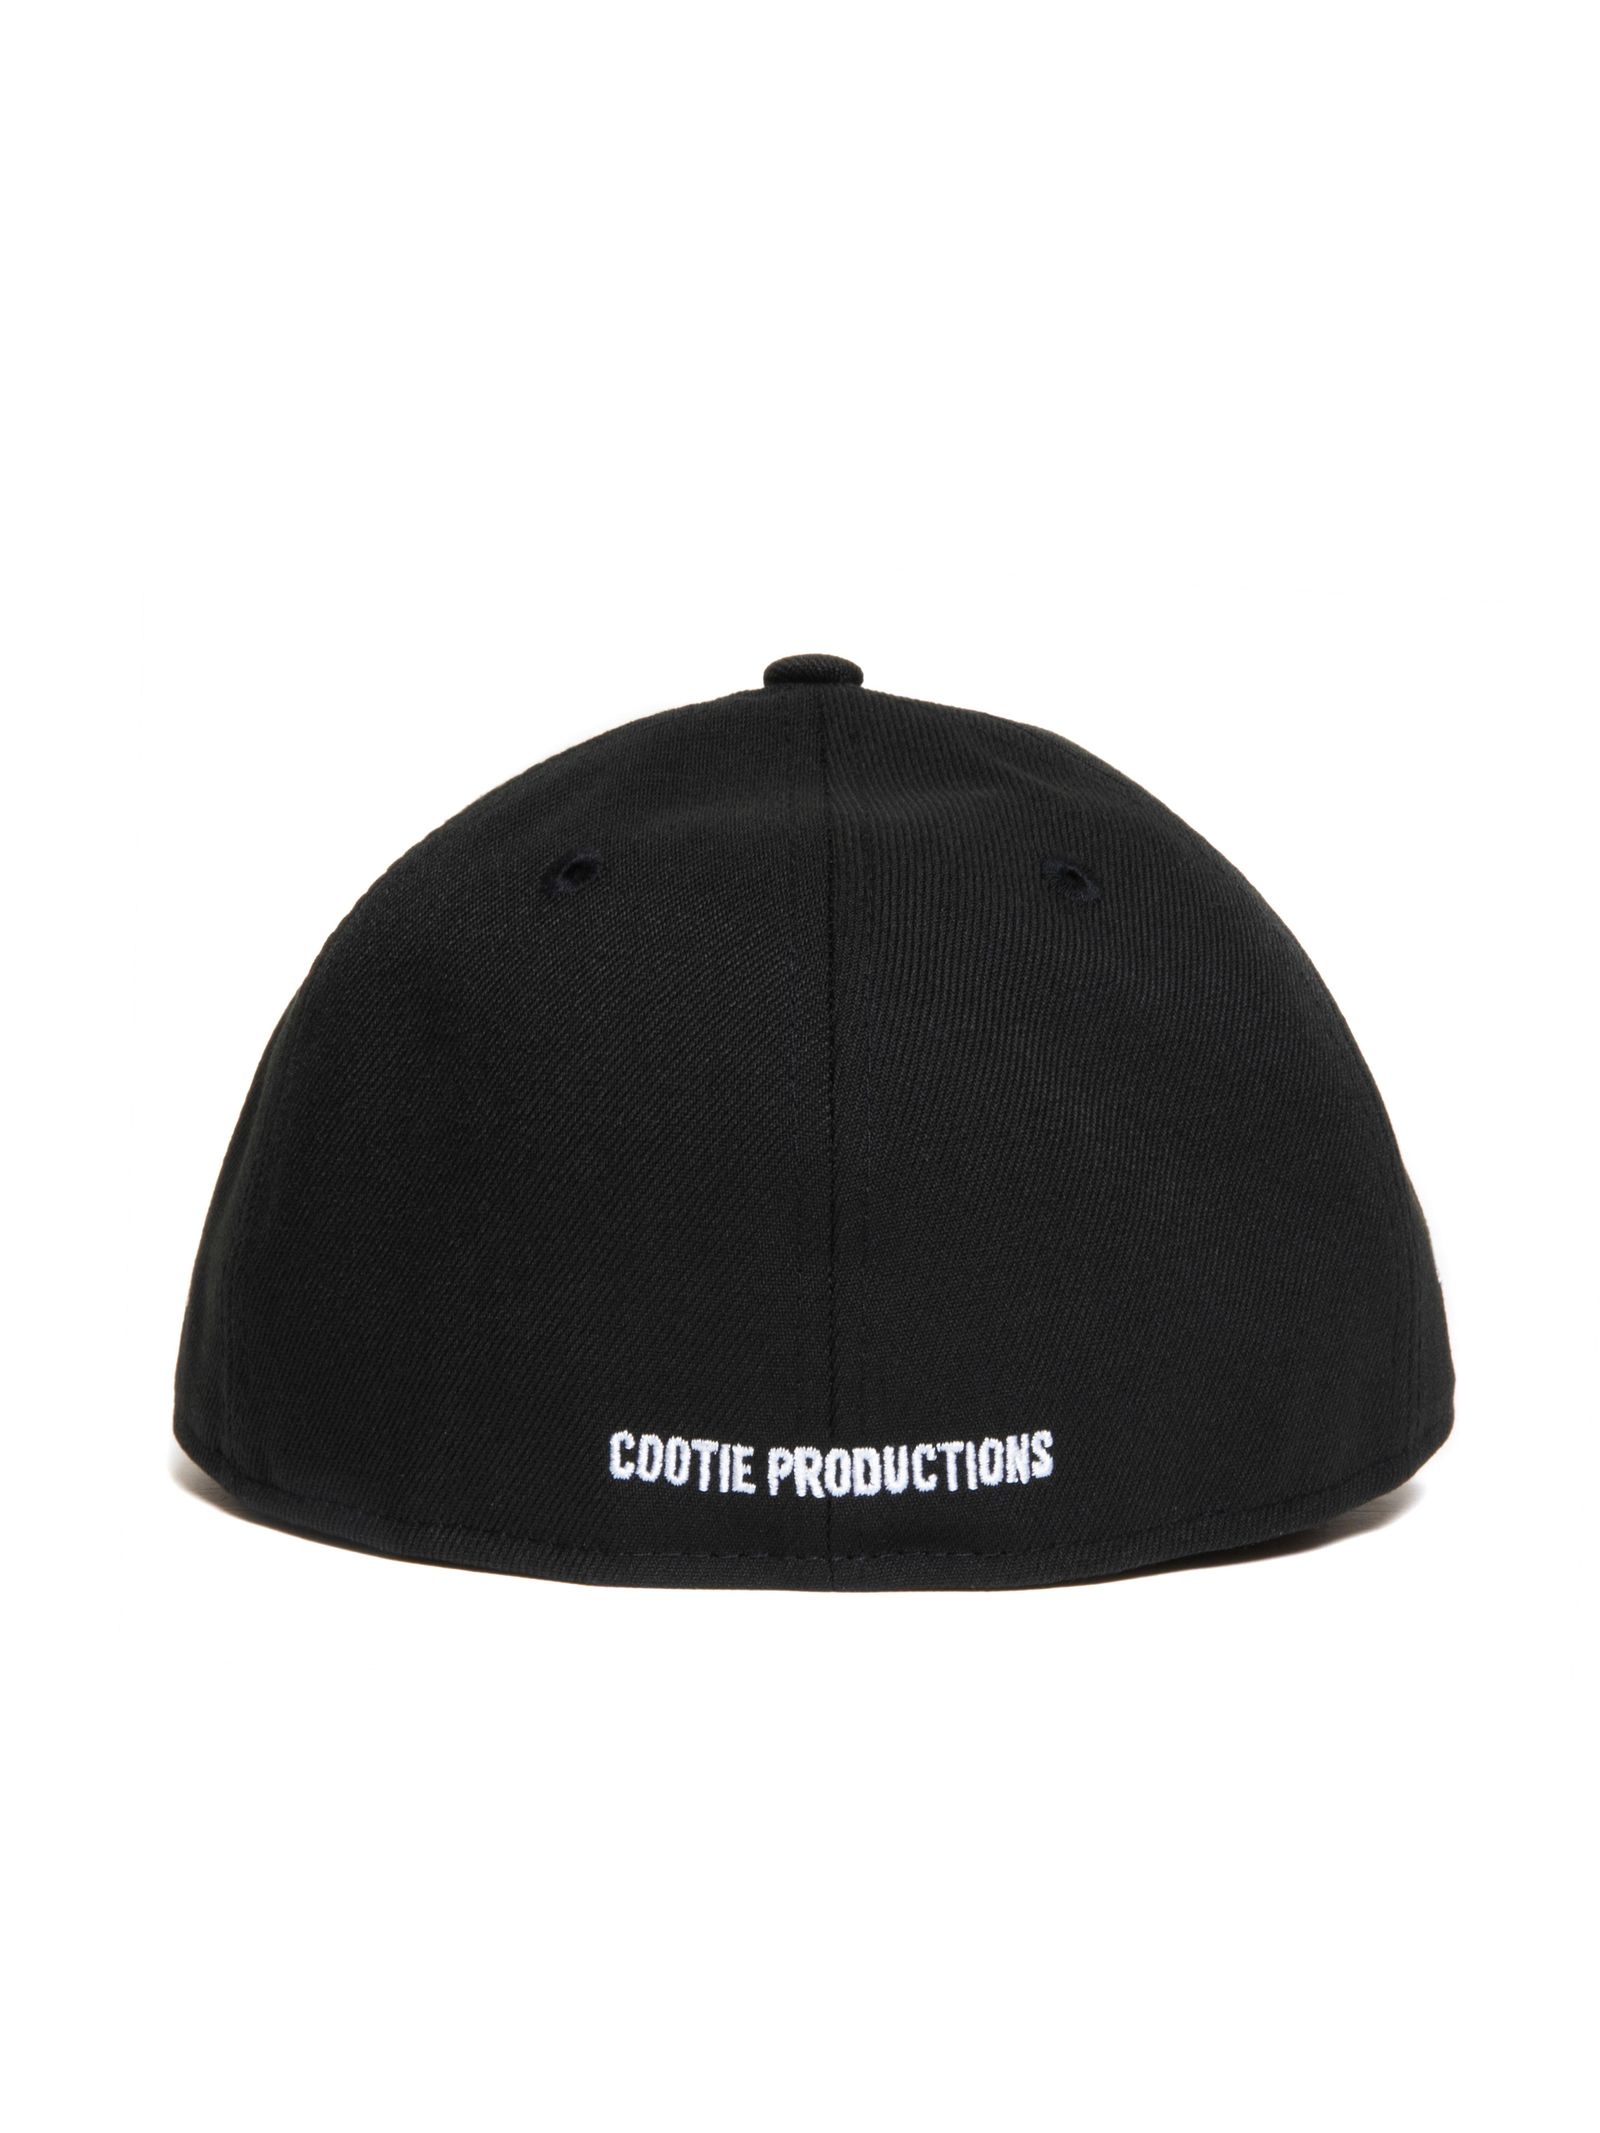 COOTIE PRODUCTIONS - Low Profile 59FIFTY (NAVY) / ニューエラ 